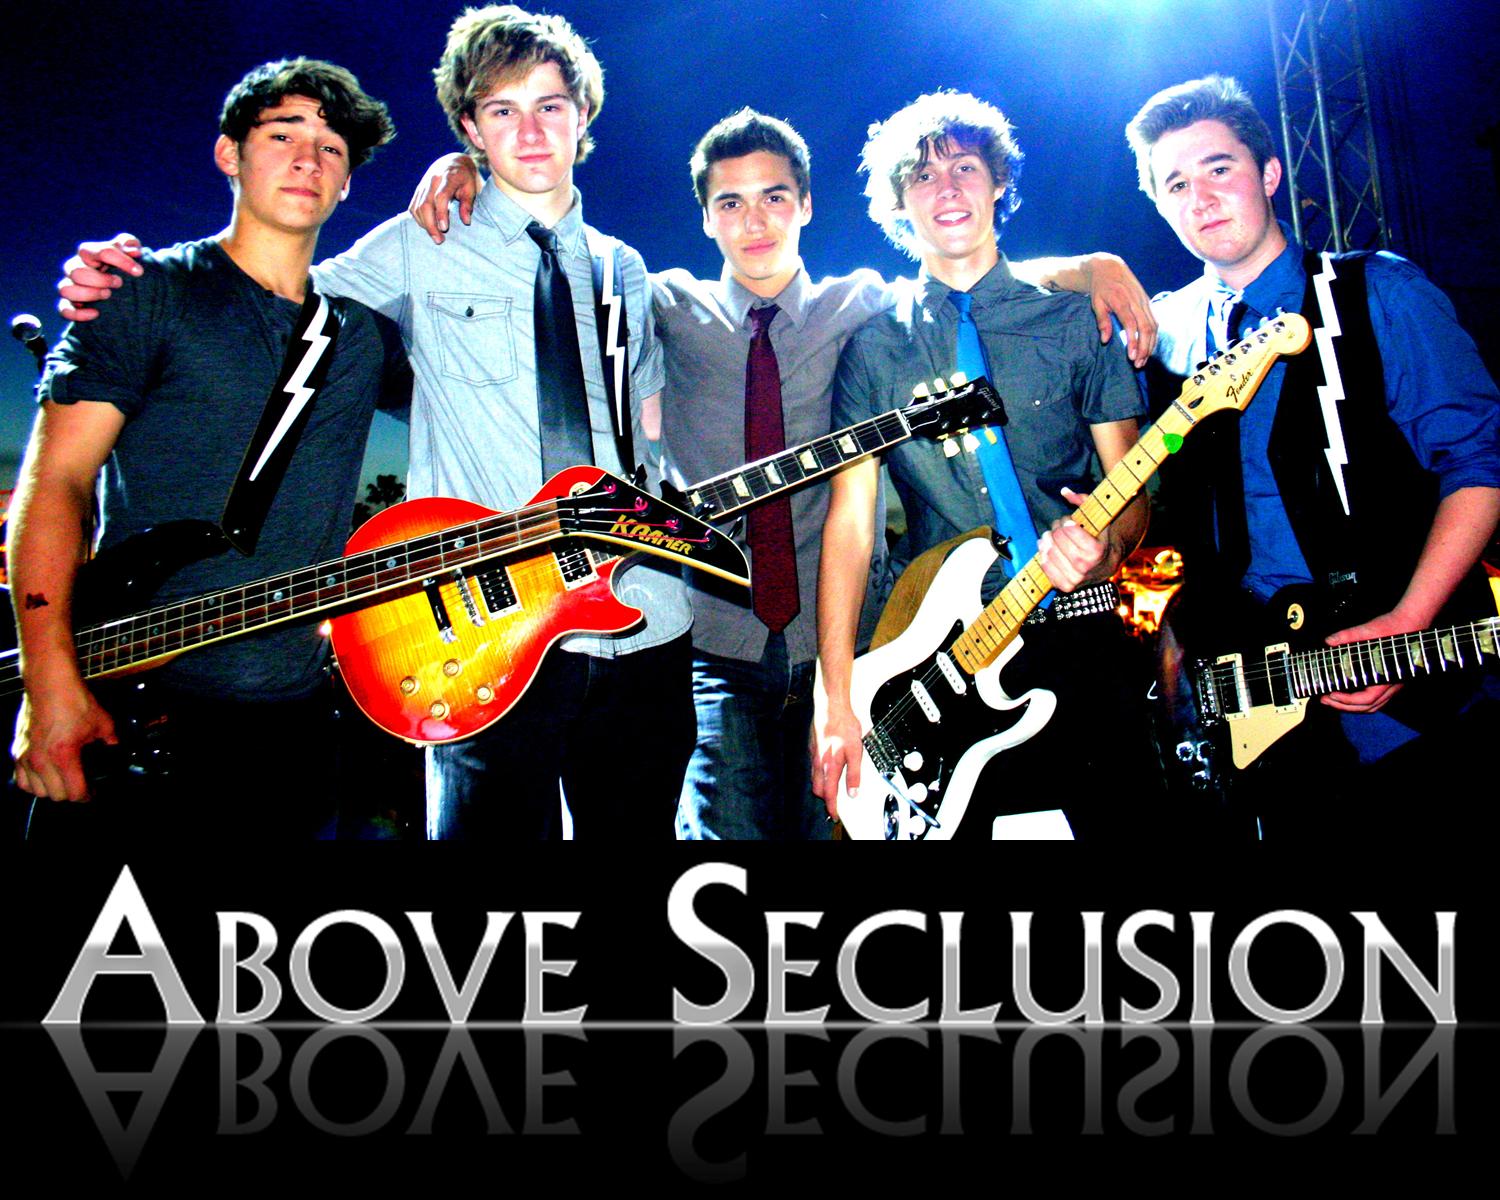 Above Seclusion       https://twitter.com/Above_Seclusion